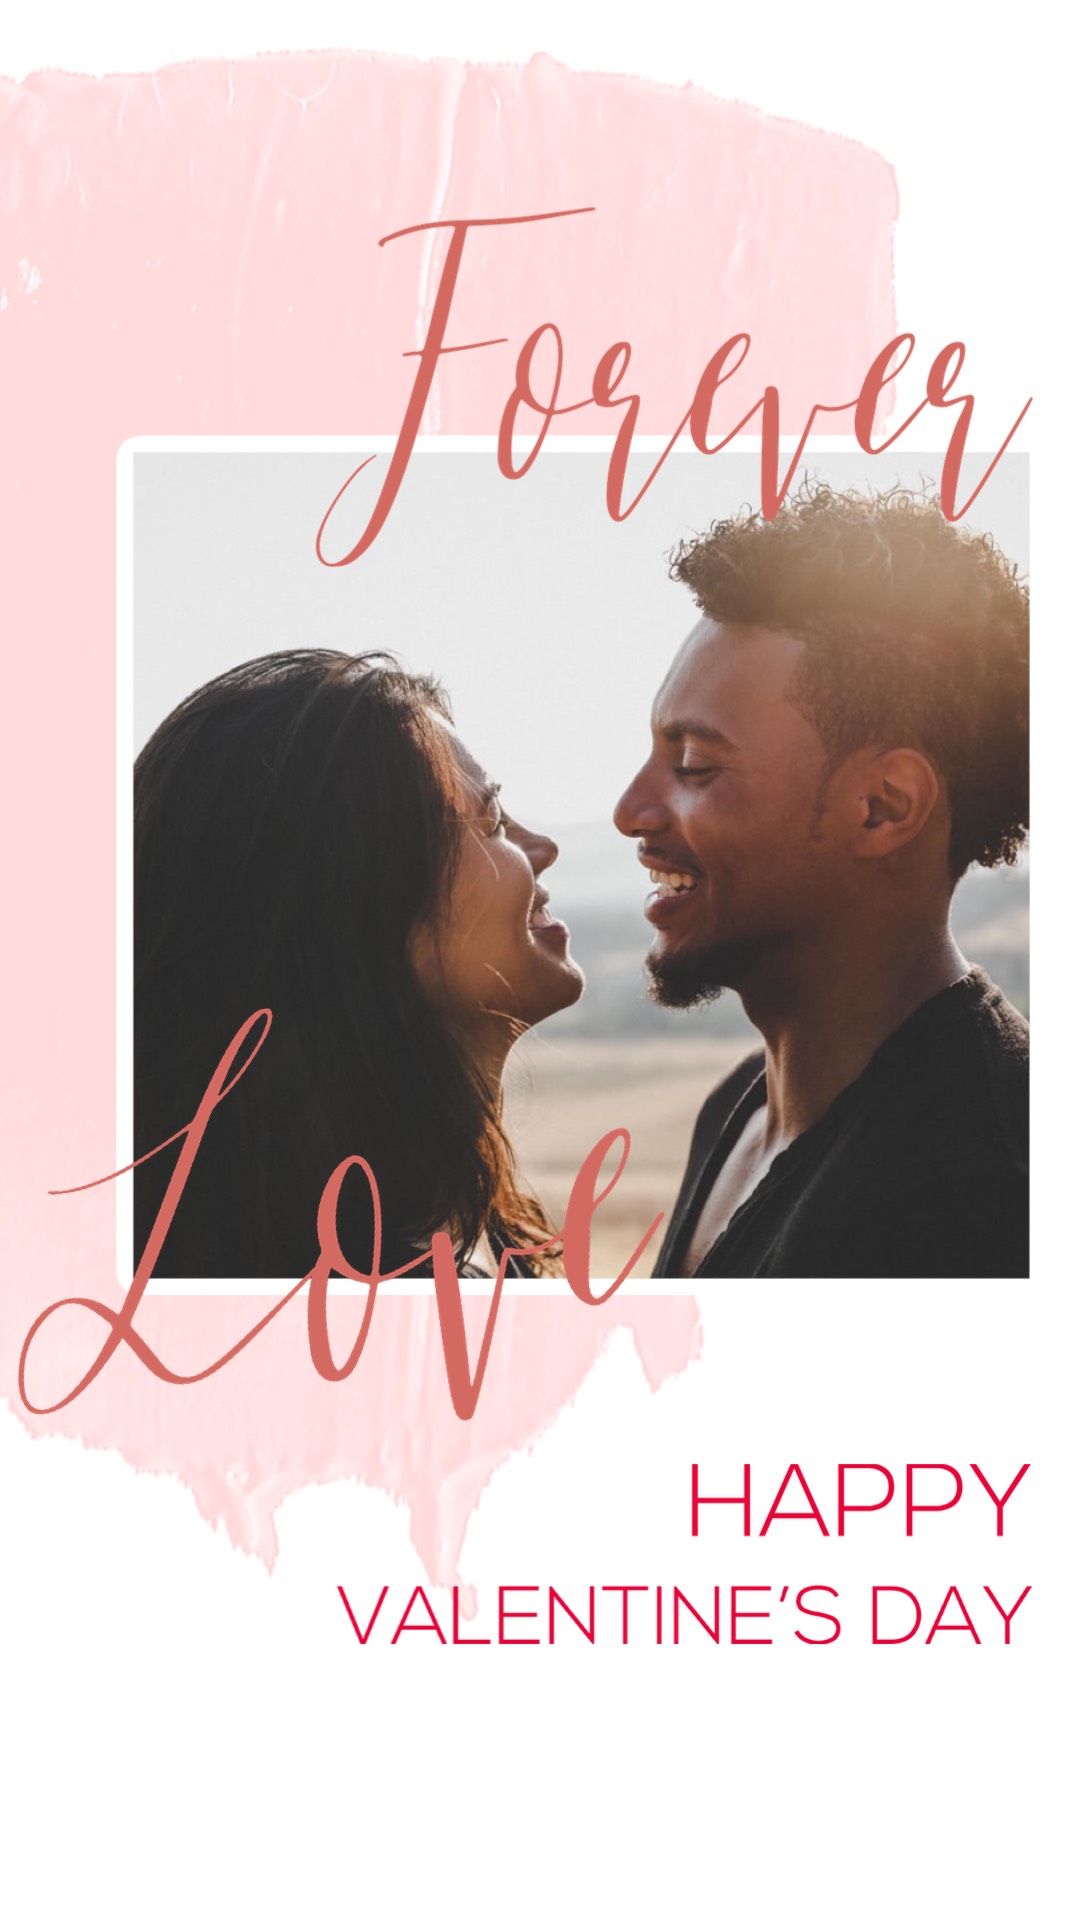 Couple in love happy valentine's day love story template